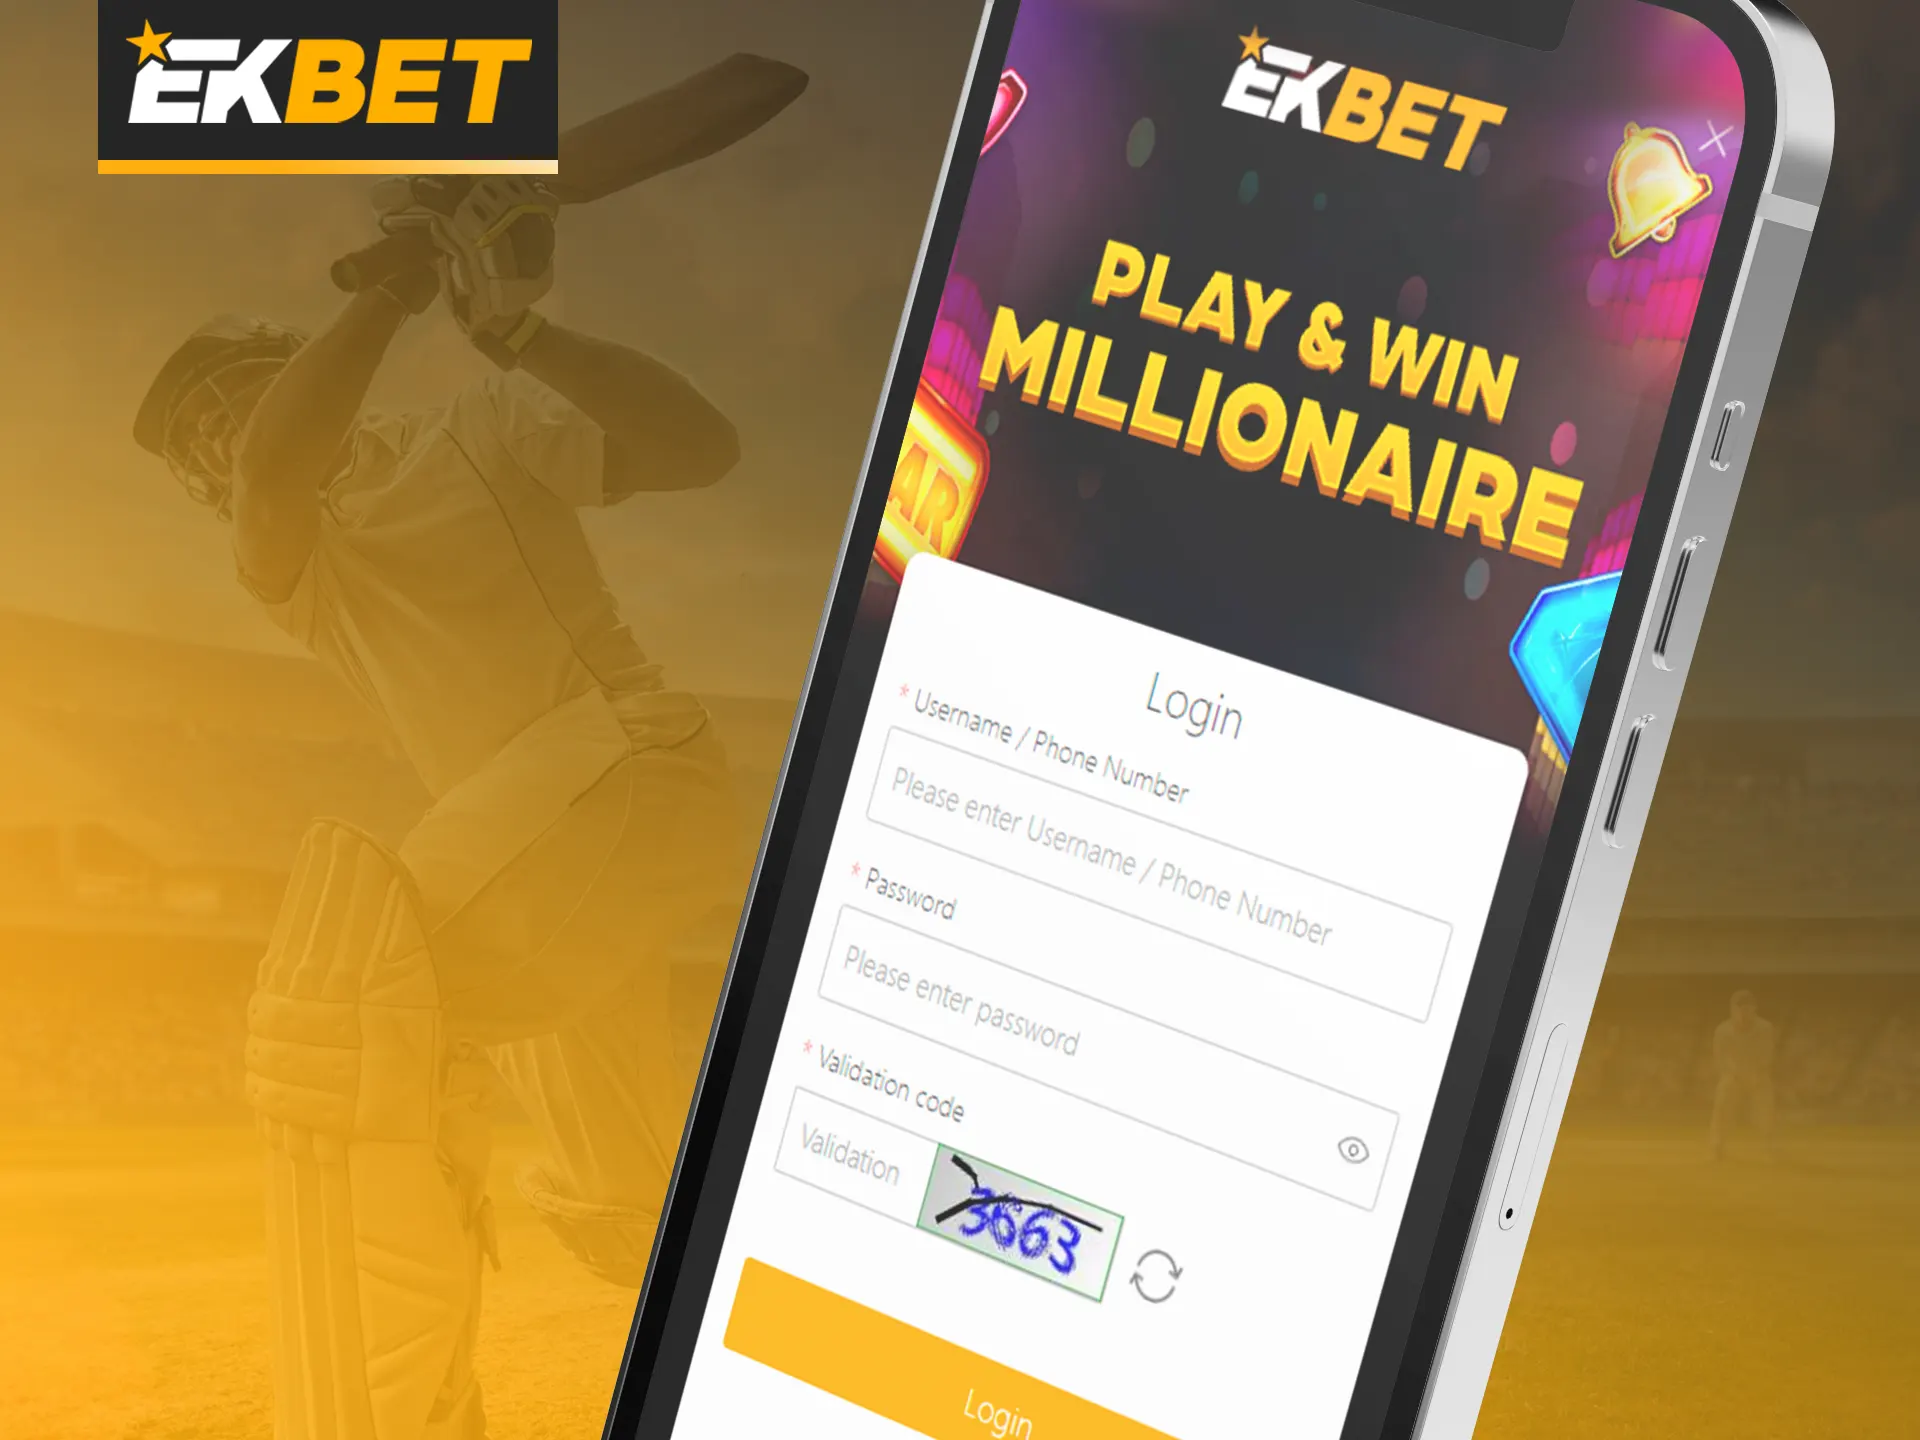 Log in to your EKbet account from your mobile device.